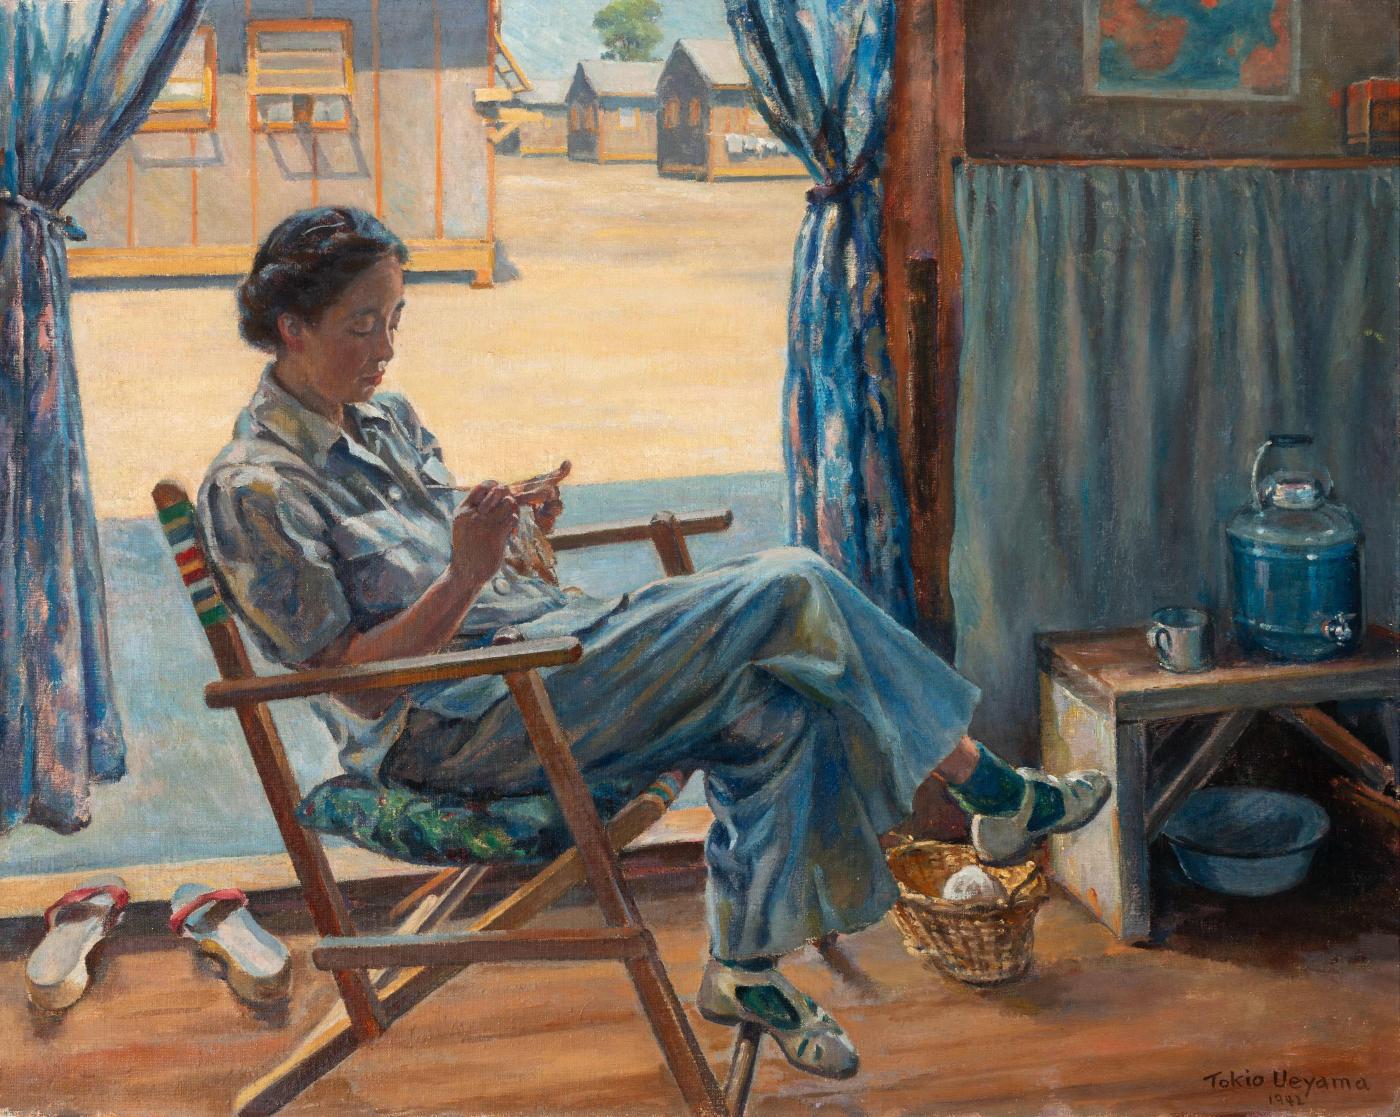 A Japanese American woman hand-paints a small object inside a barrack at a Japanese American incarceration camp. This painting by Tokio Ueyama is one of the top Southwest art exhibitions to see this summer.